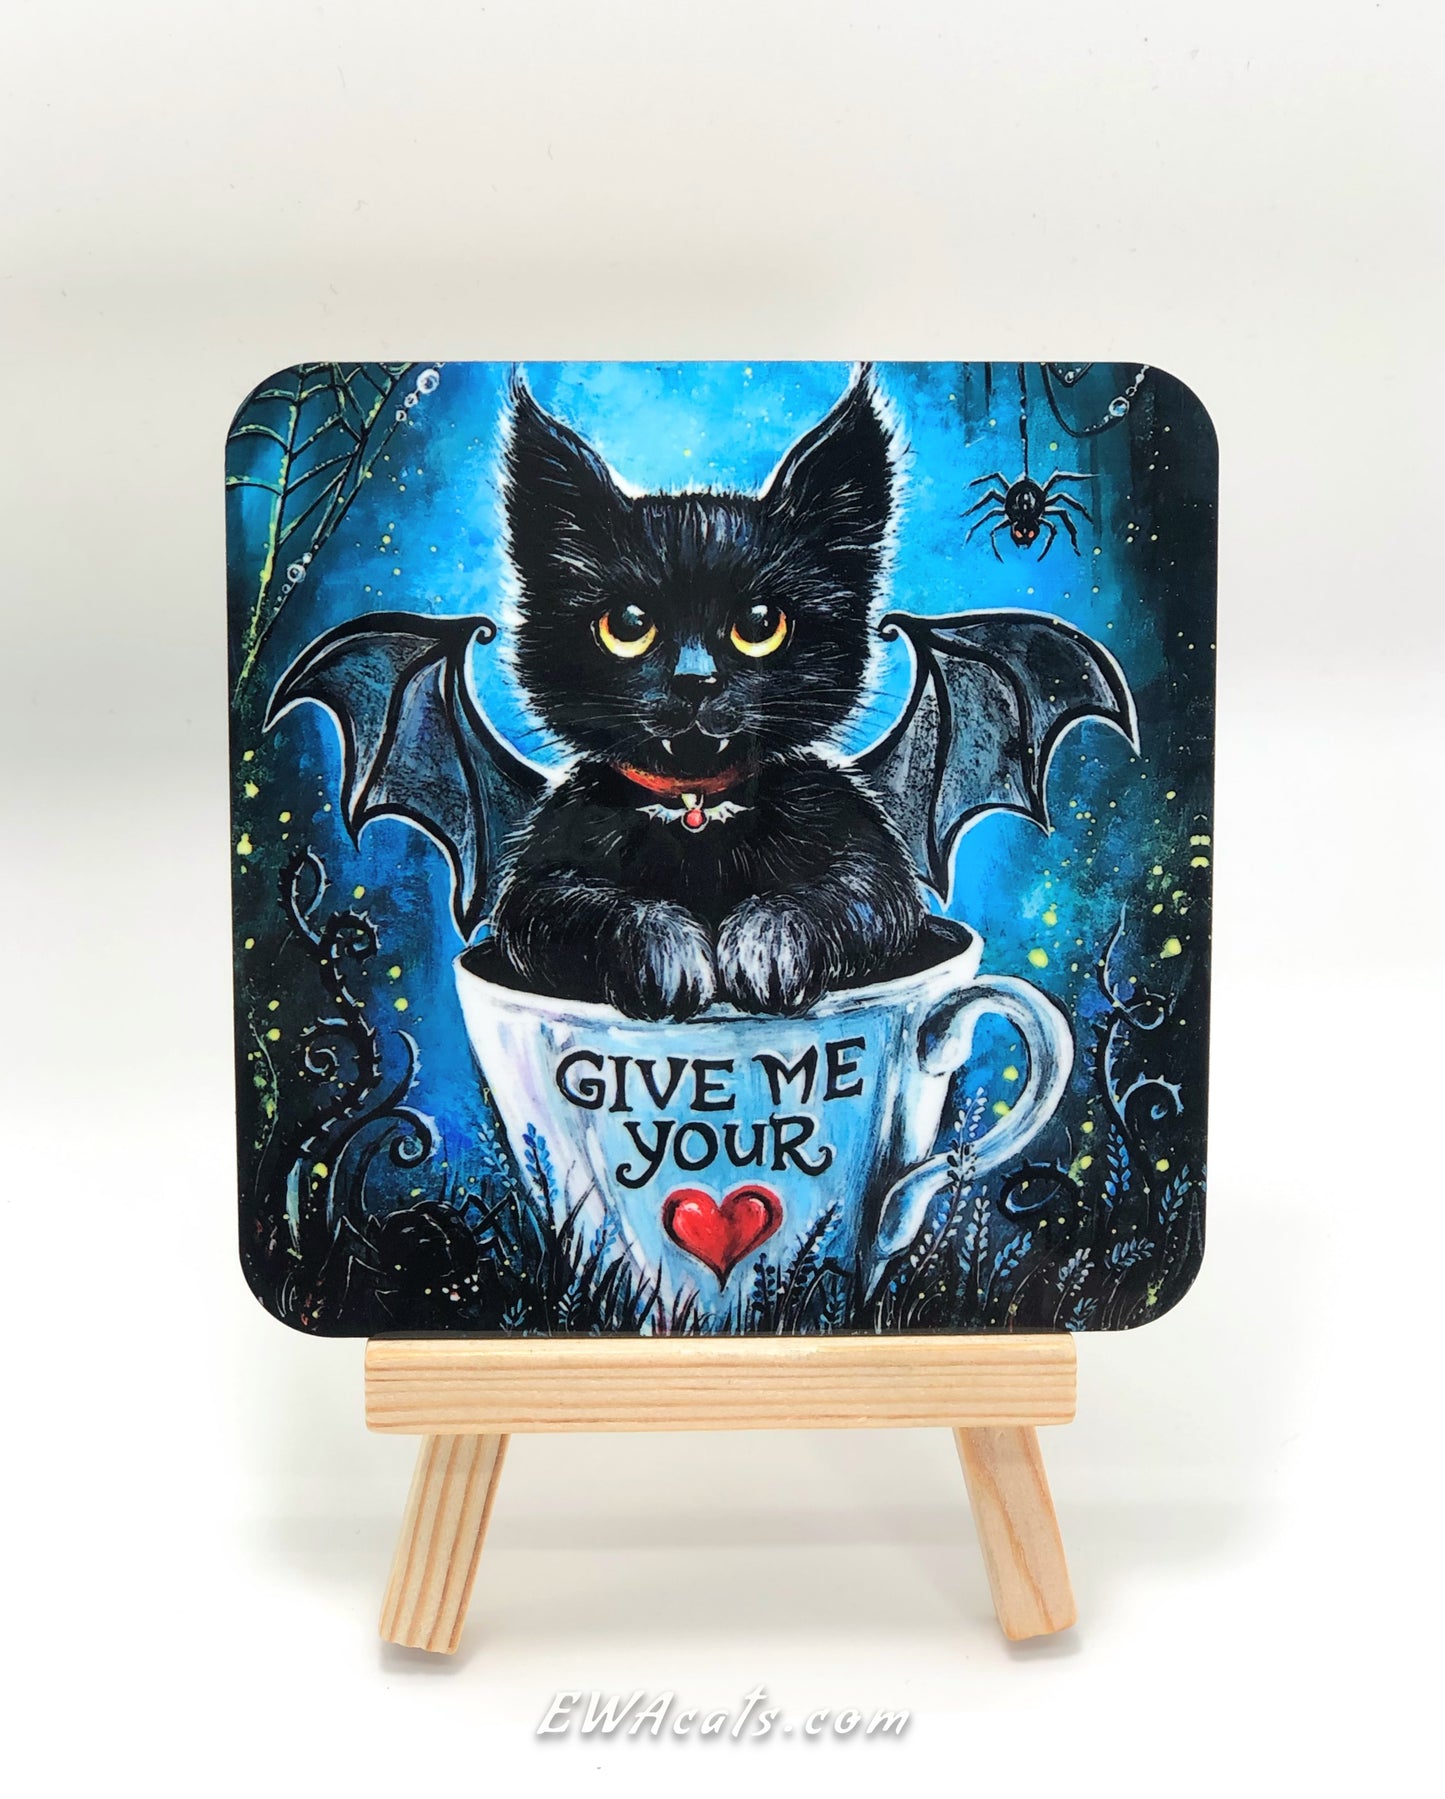 Coaster "Give Me Your Heart"